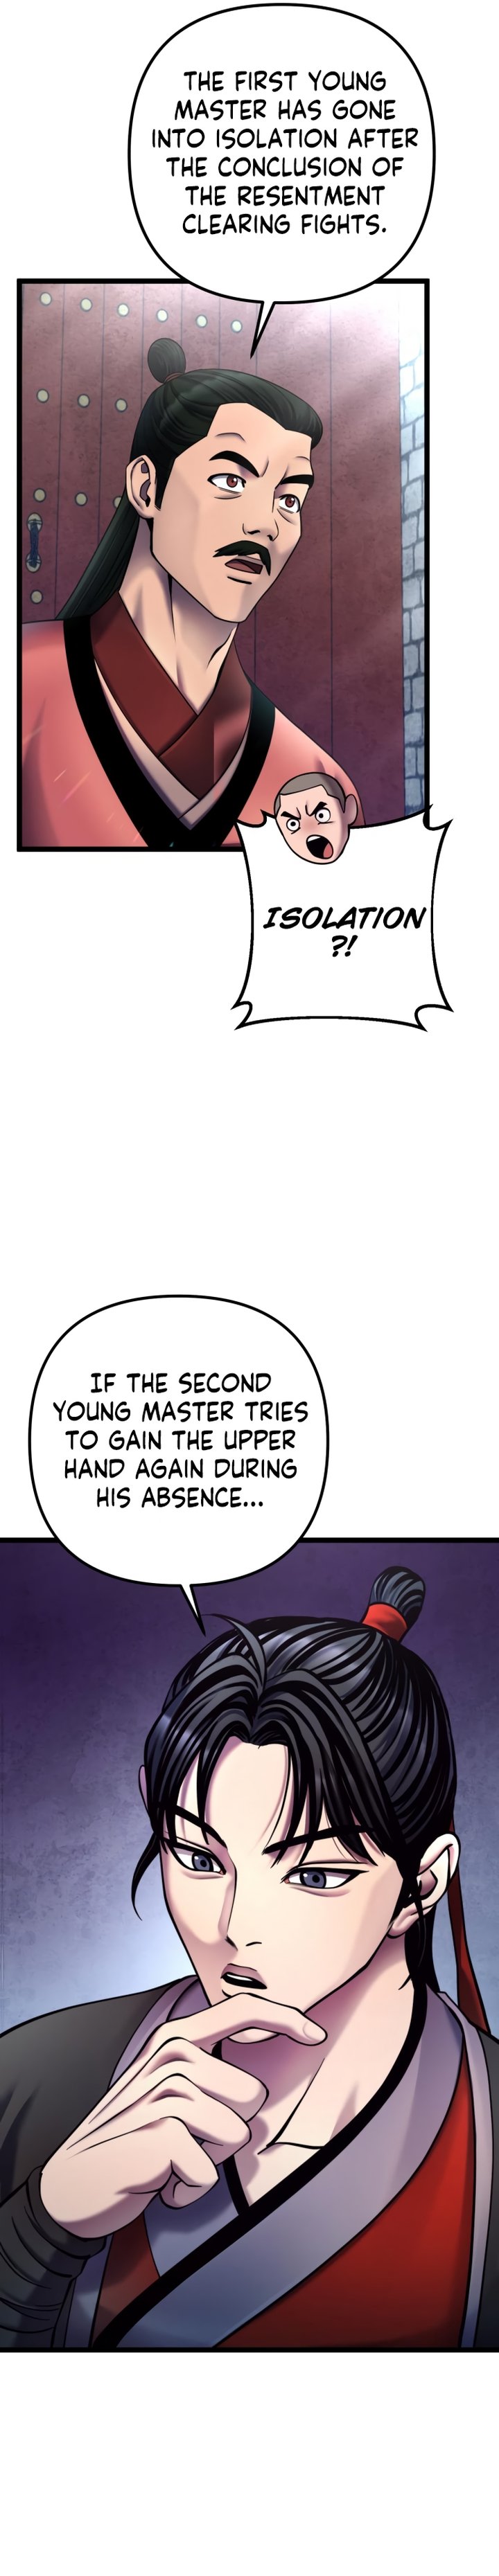 Revenge Of Young Master Peng 82 3